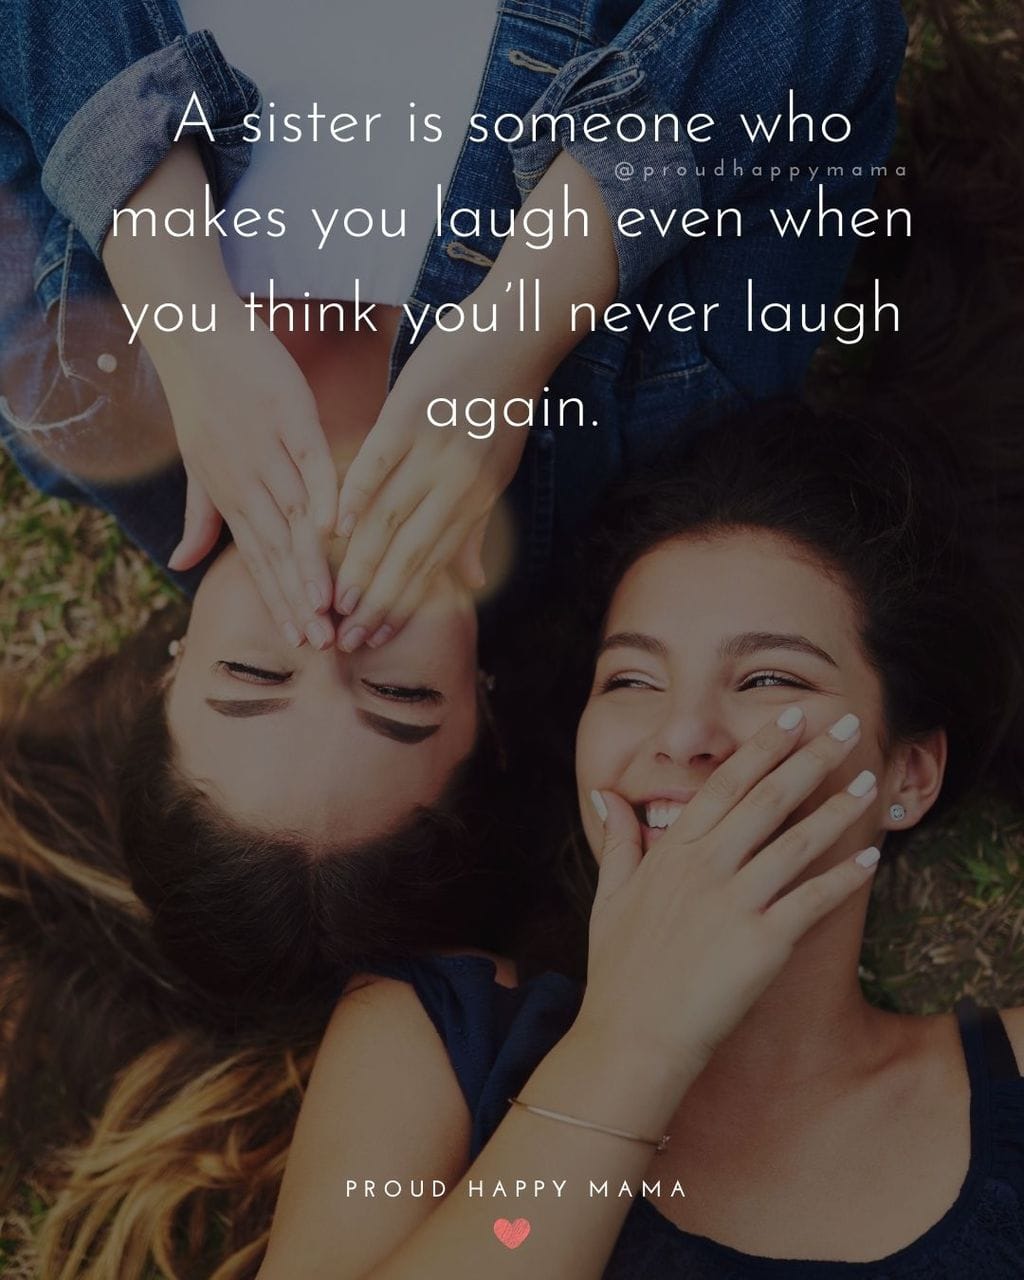 Sister Quotes - A sister is someone who makes you laugh even when you think youll never laugh again.